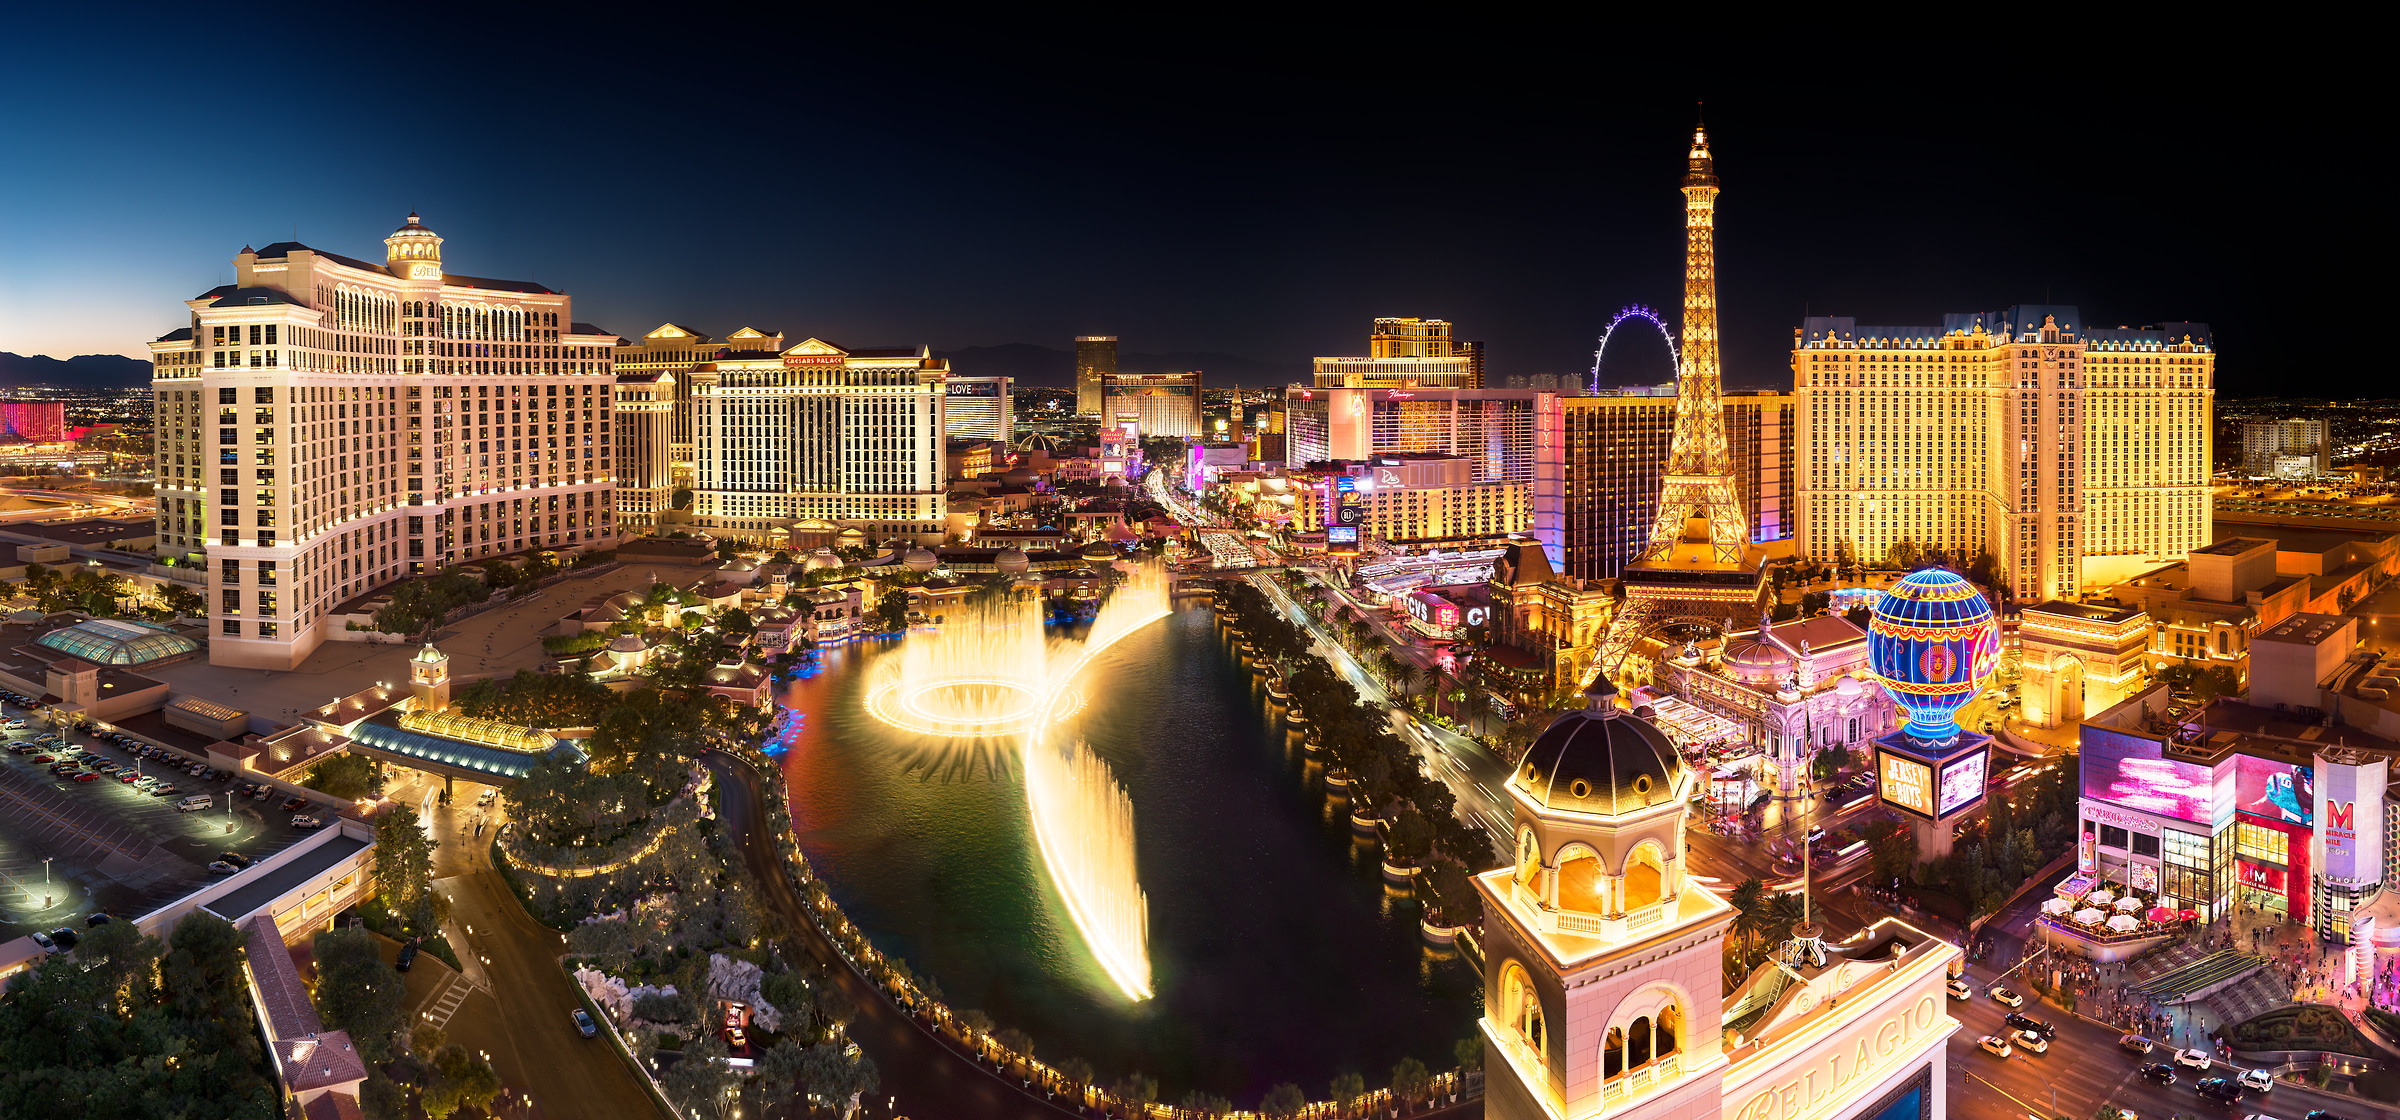 765 megapixels! A very high resolution, large-format VAST photo of the Las Vegas Strip skyline at night with the Fountains of Bellagio and casinos including Paris, Ceasars Palace, The Venetian; skyline photograph created by Jim Tarpo in Las Vegas, Nevada